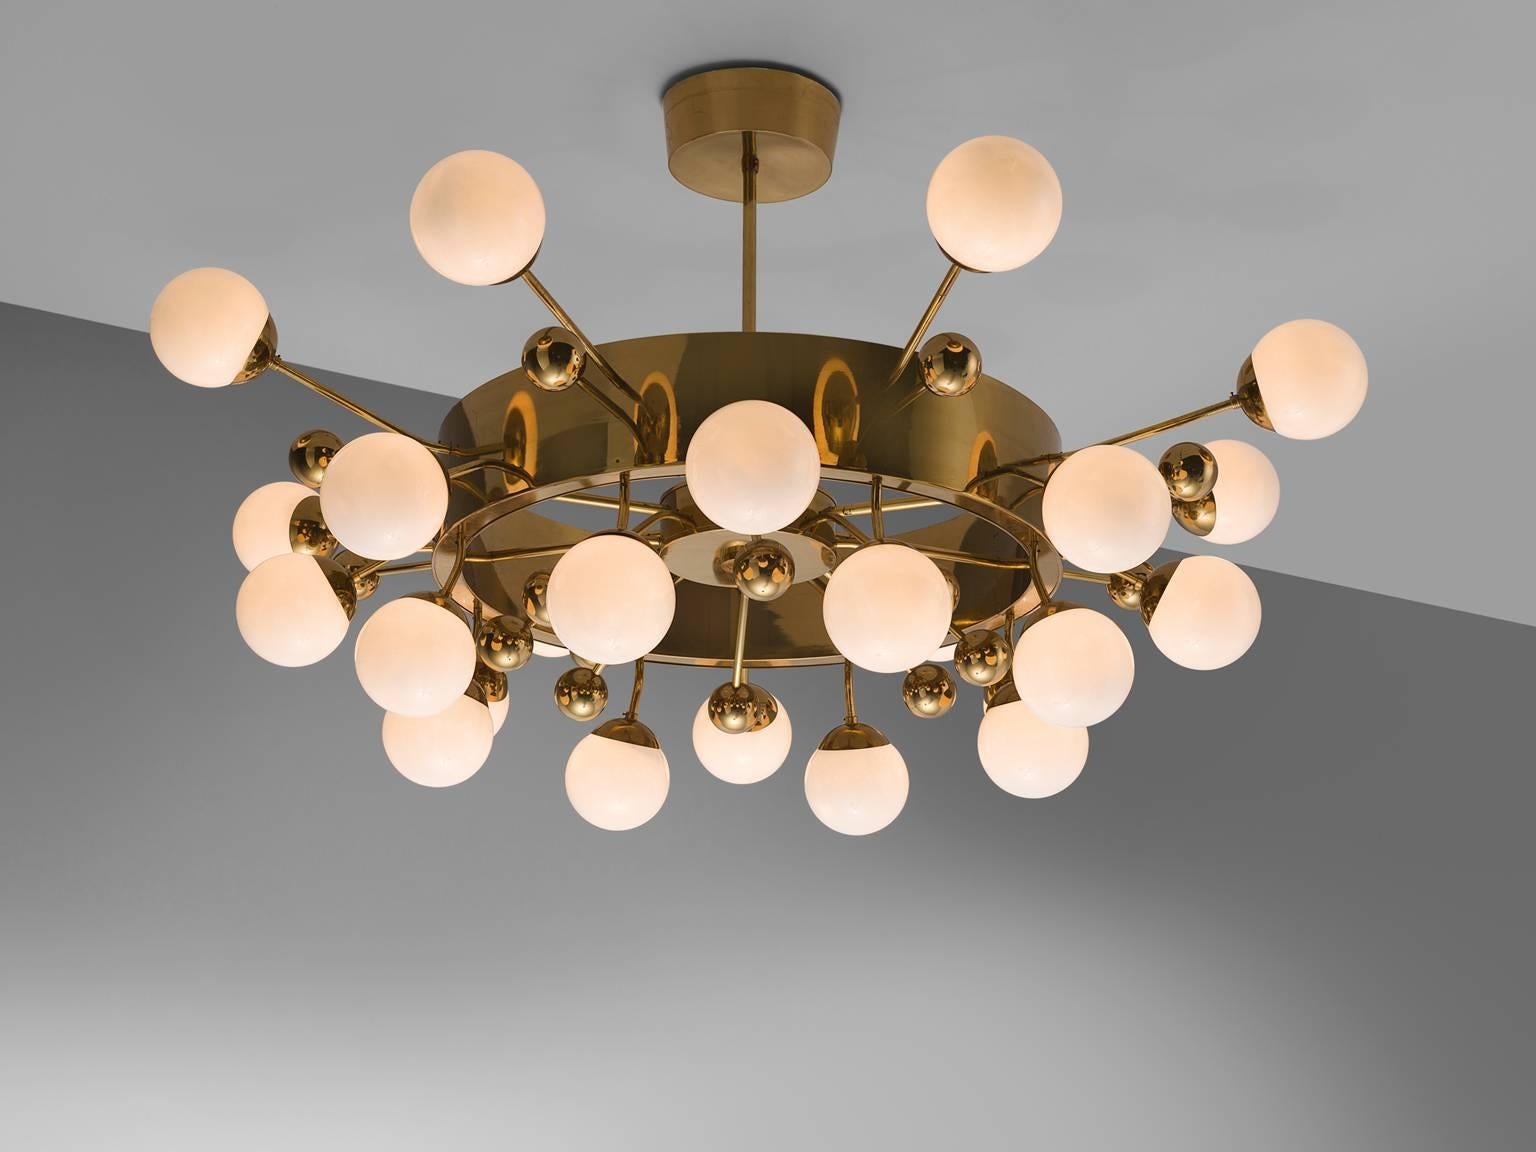 Large 2.2 mt / 7.2 ft sputnik chandelier, in glass and brass, Europe, 1960s.

This grand chandelier is executed with a brass fixture and 24 opaline glass spheres. The chandelier exists of two layers of glass bulbs amongst which brass globes are